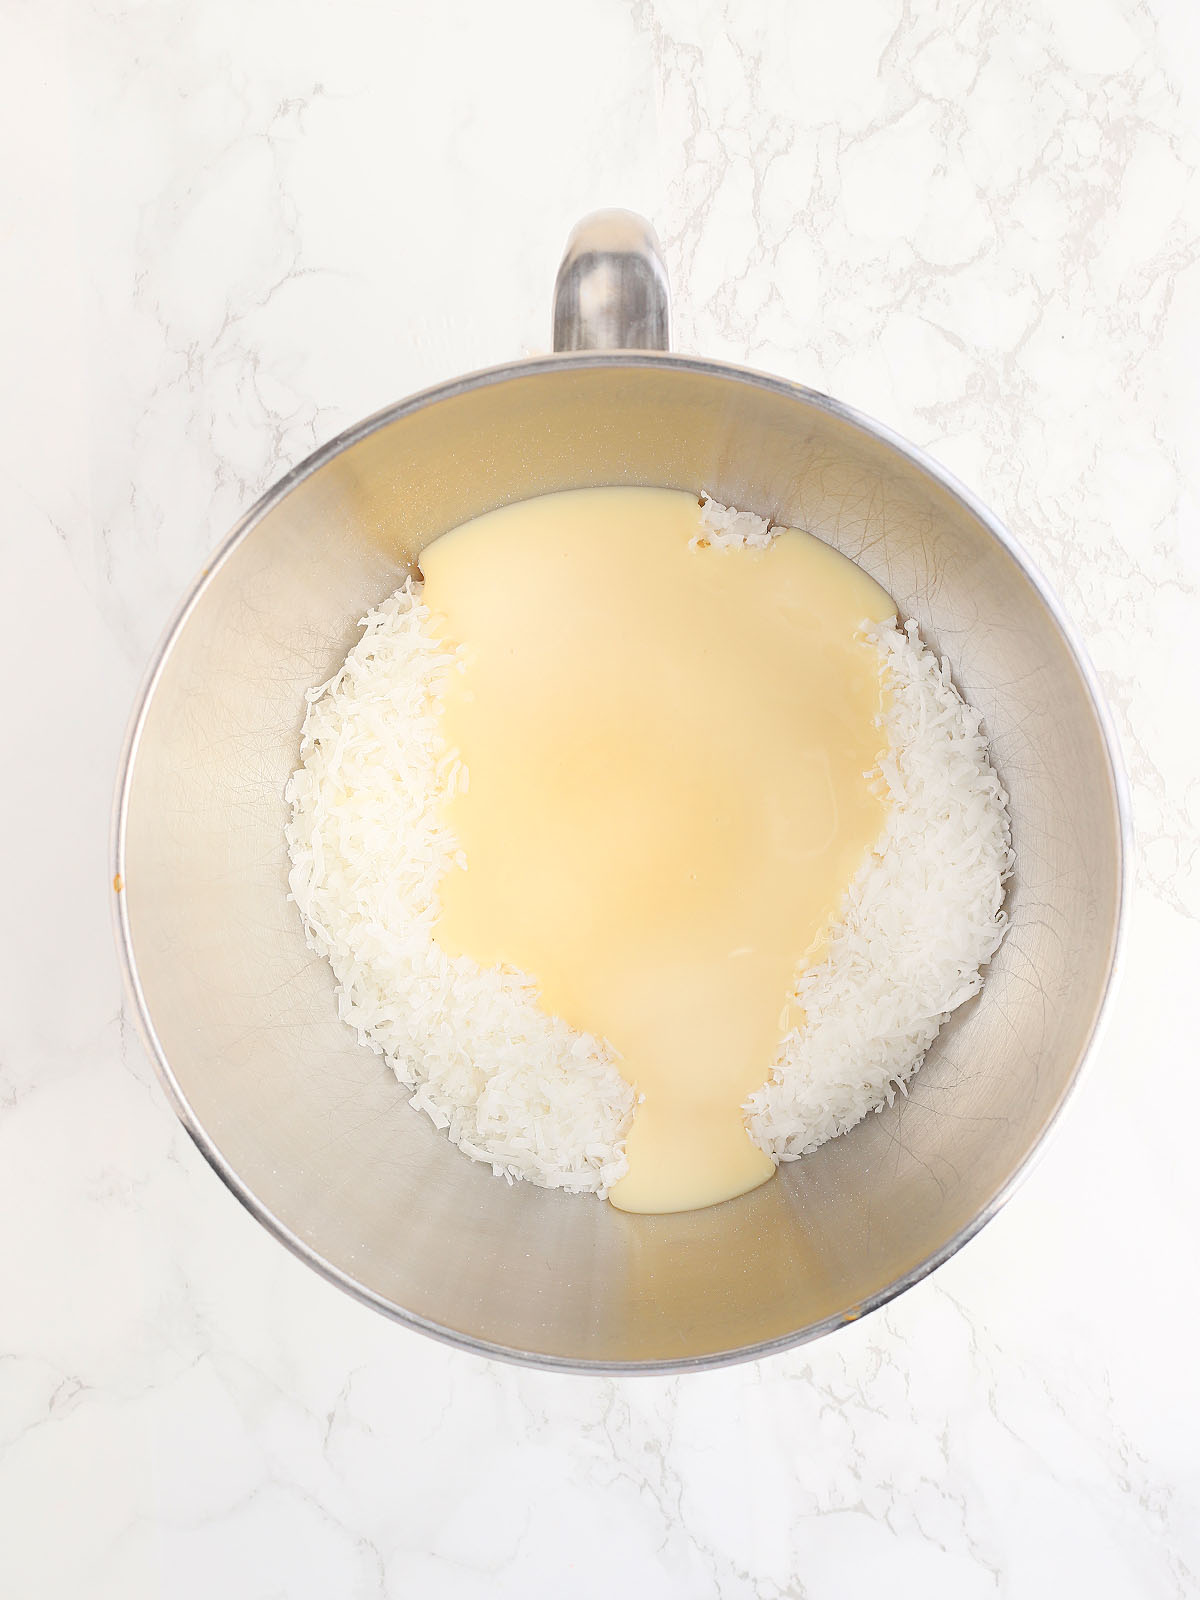 condensed milk and coconut in a metal mixing bowl before it has been whisked together